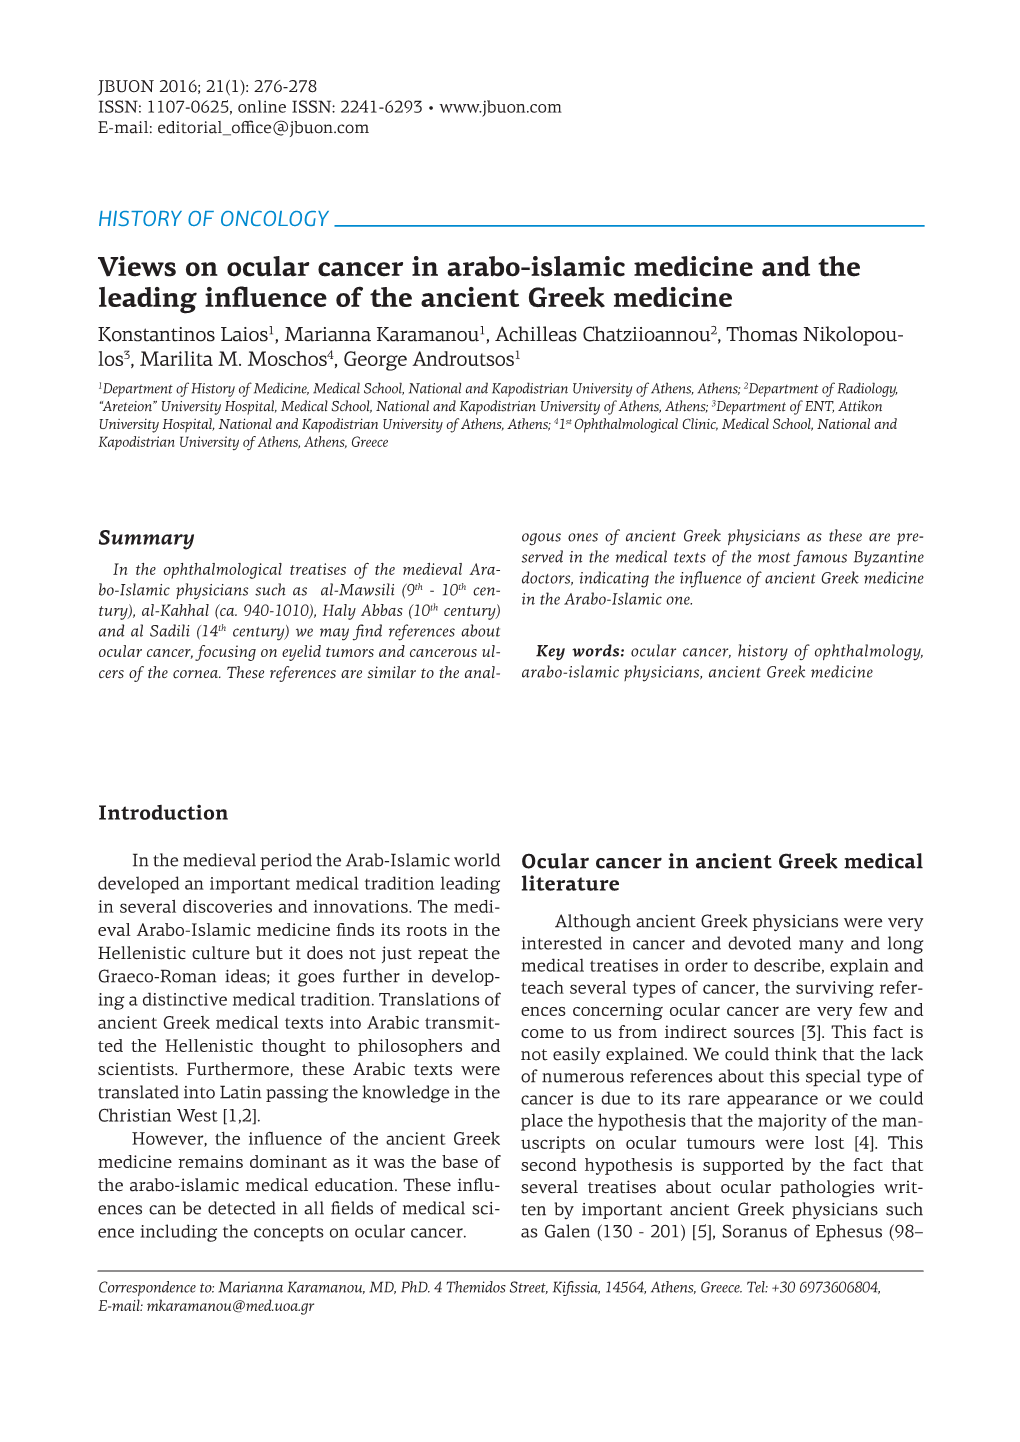 Views on Ocular Cancer in Arabo-Islamic Medicine and The